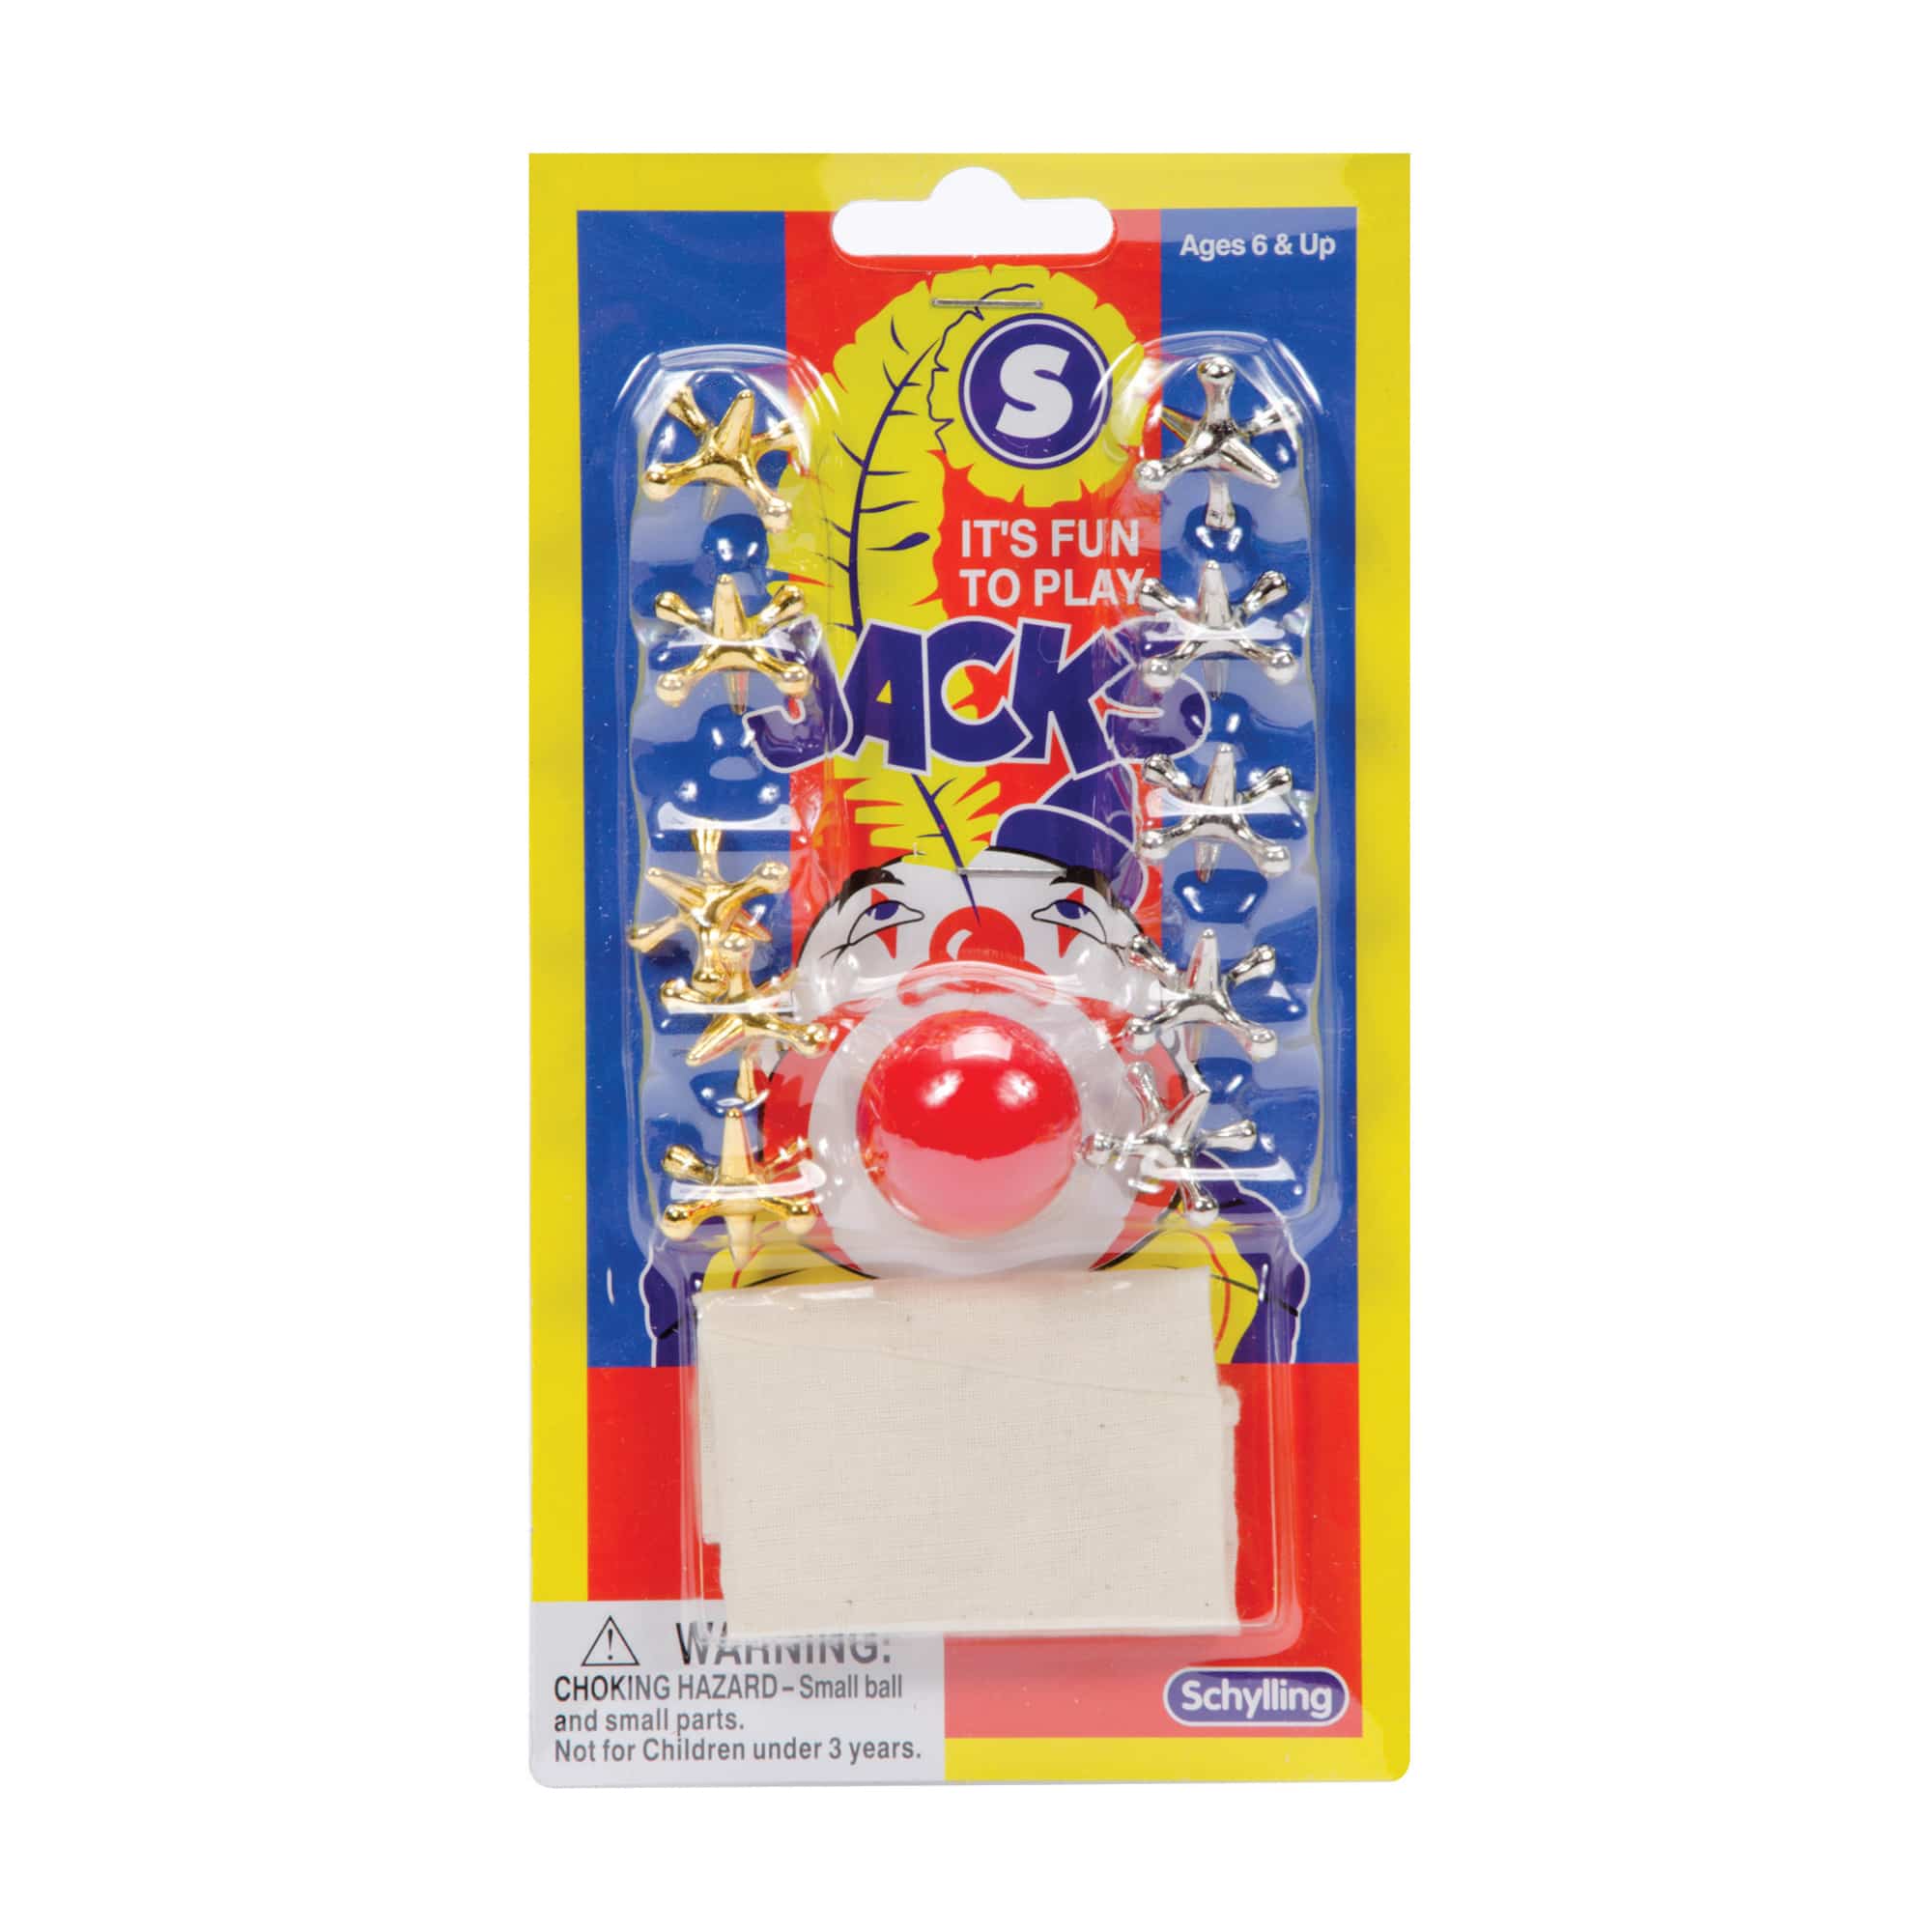 Metal Jacks-Games-Schylling-Yellow Springs Toy Company